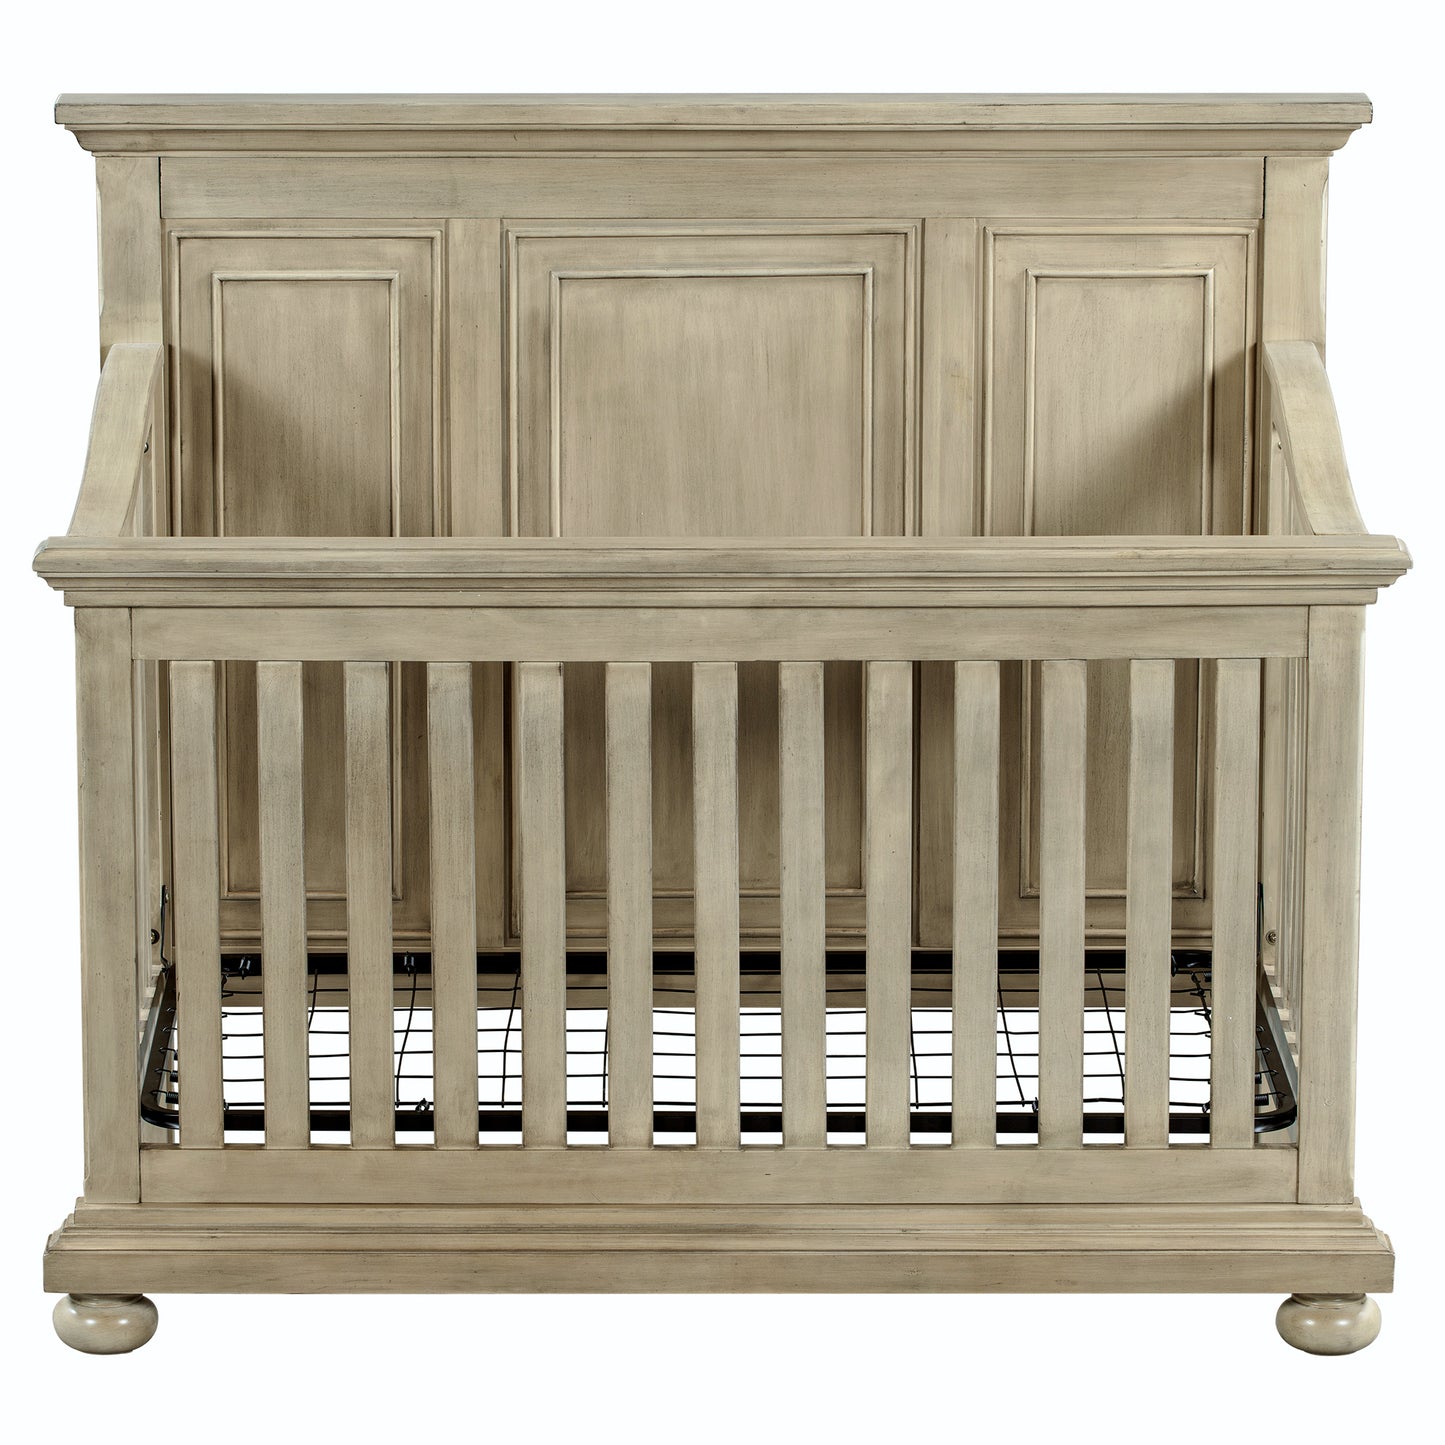 Traditional Farmhouse Style 4-in-1 Full Size Convertible Crib - Converts to Toddler Bed, Daybed and Full-Size Bed, Stone Gray